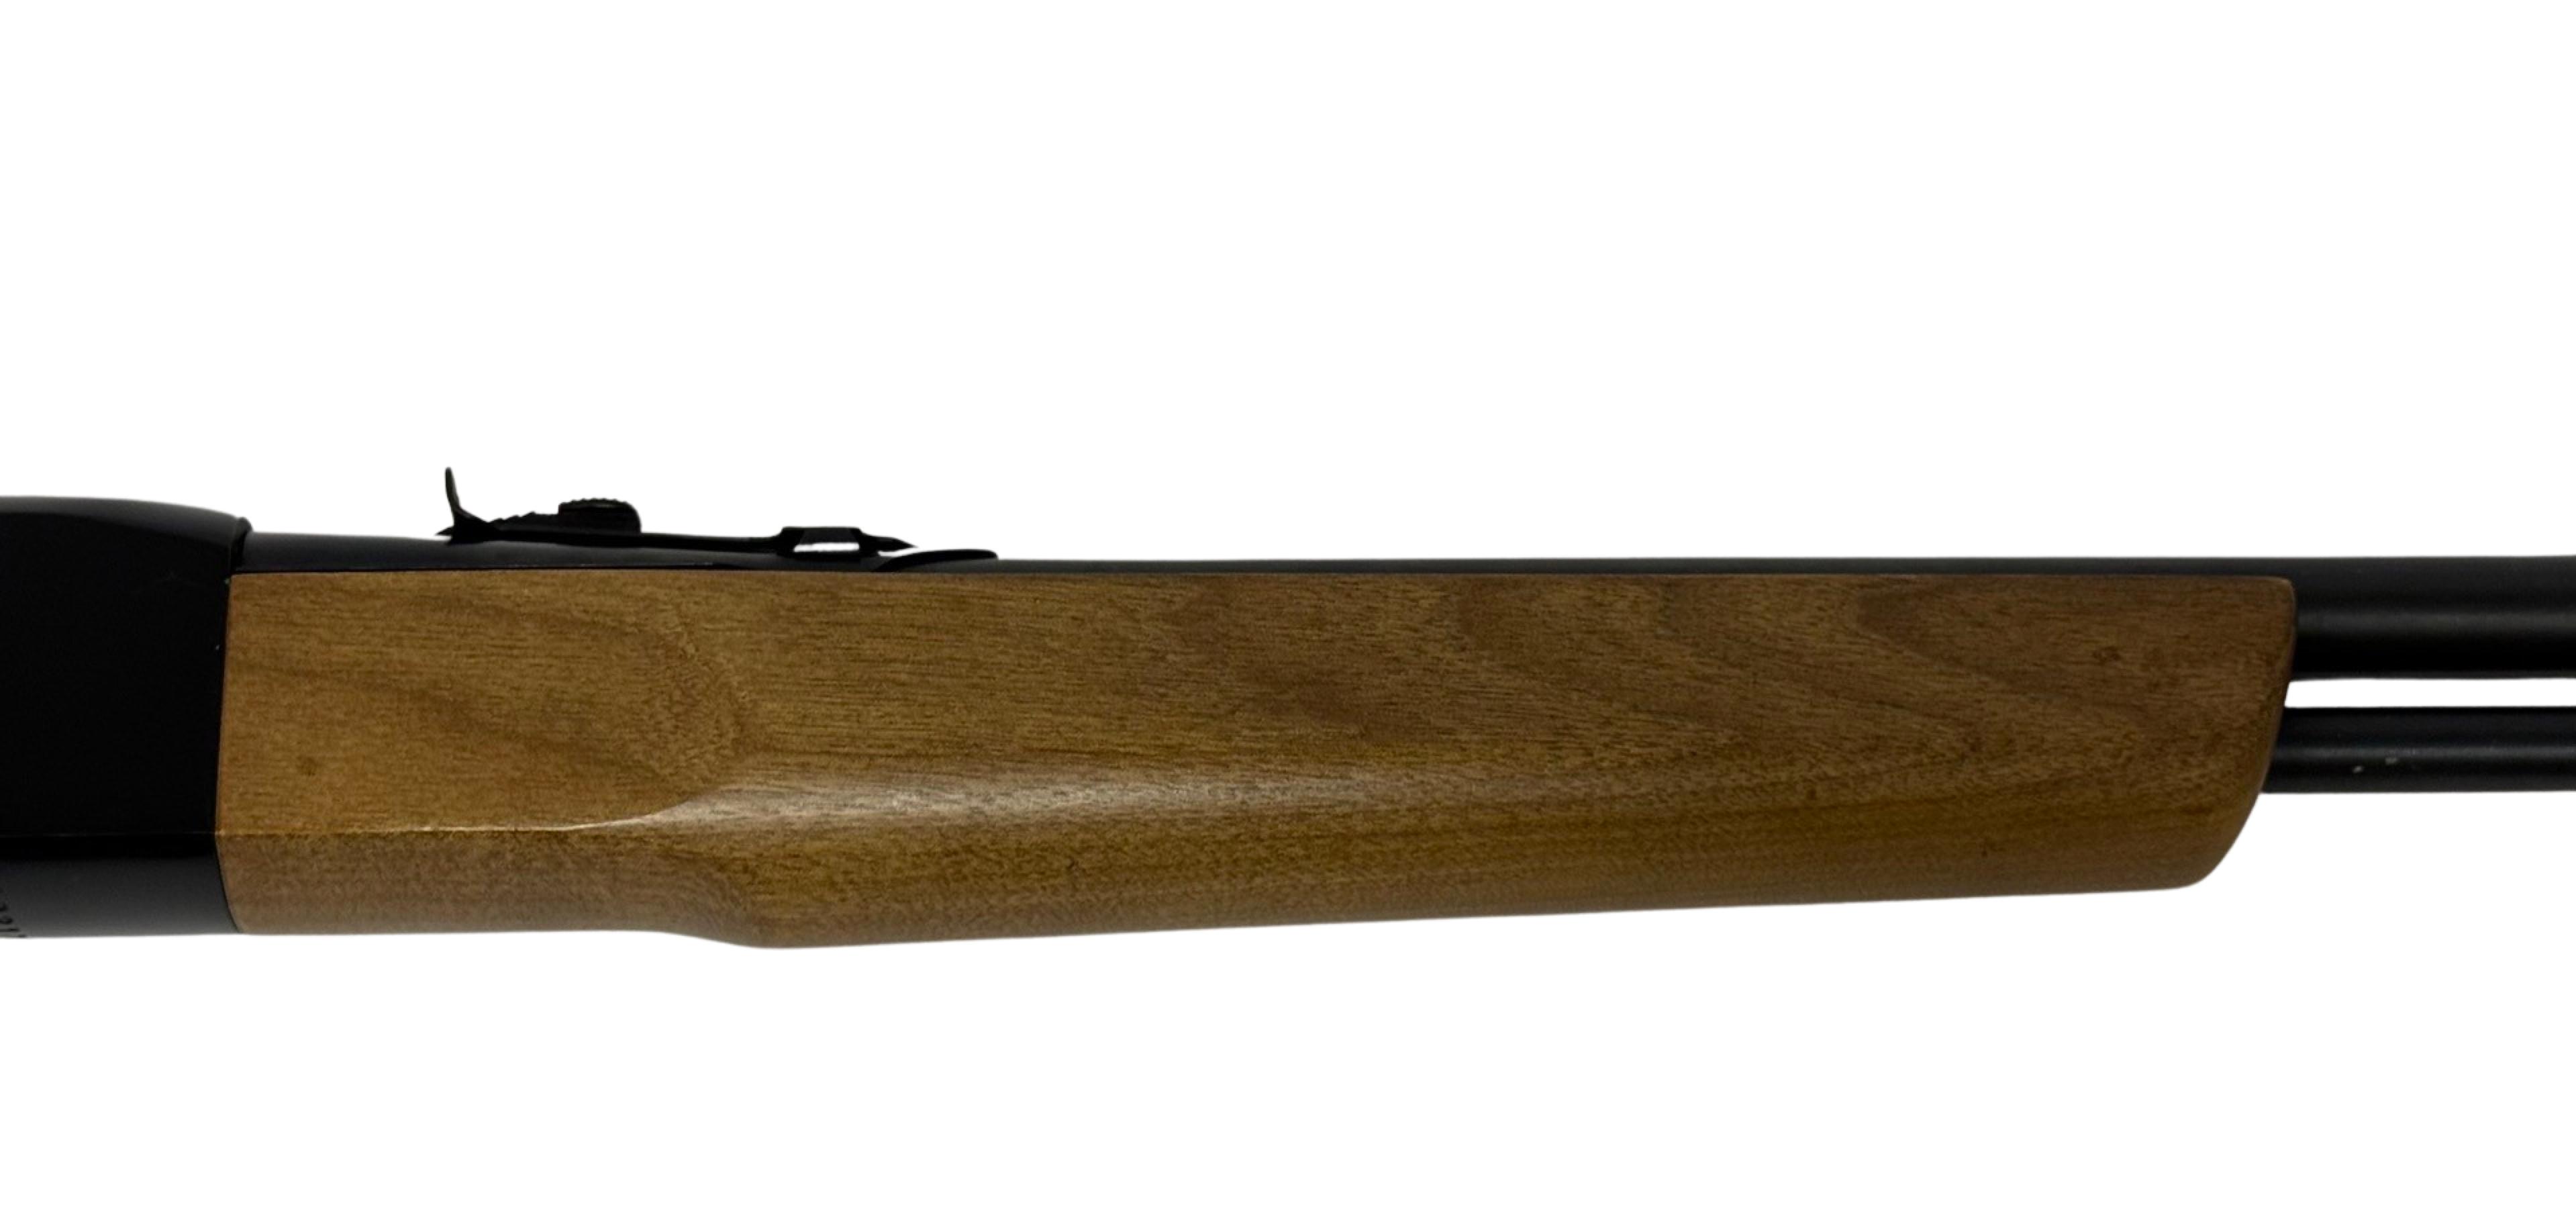 Excellent Winchester Model 190 .22 L or LR Semi-Automatic Rifle